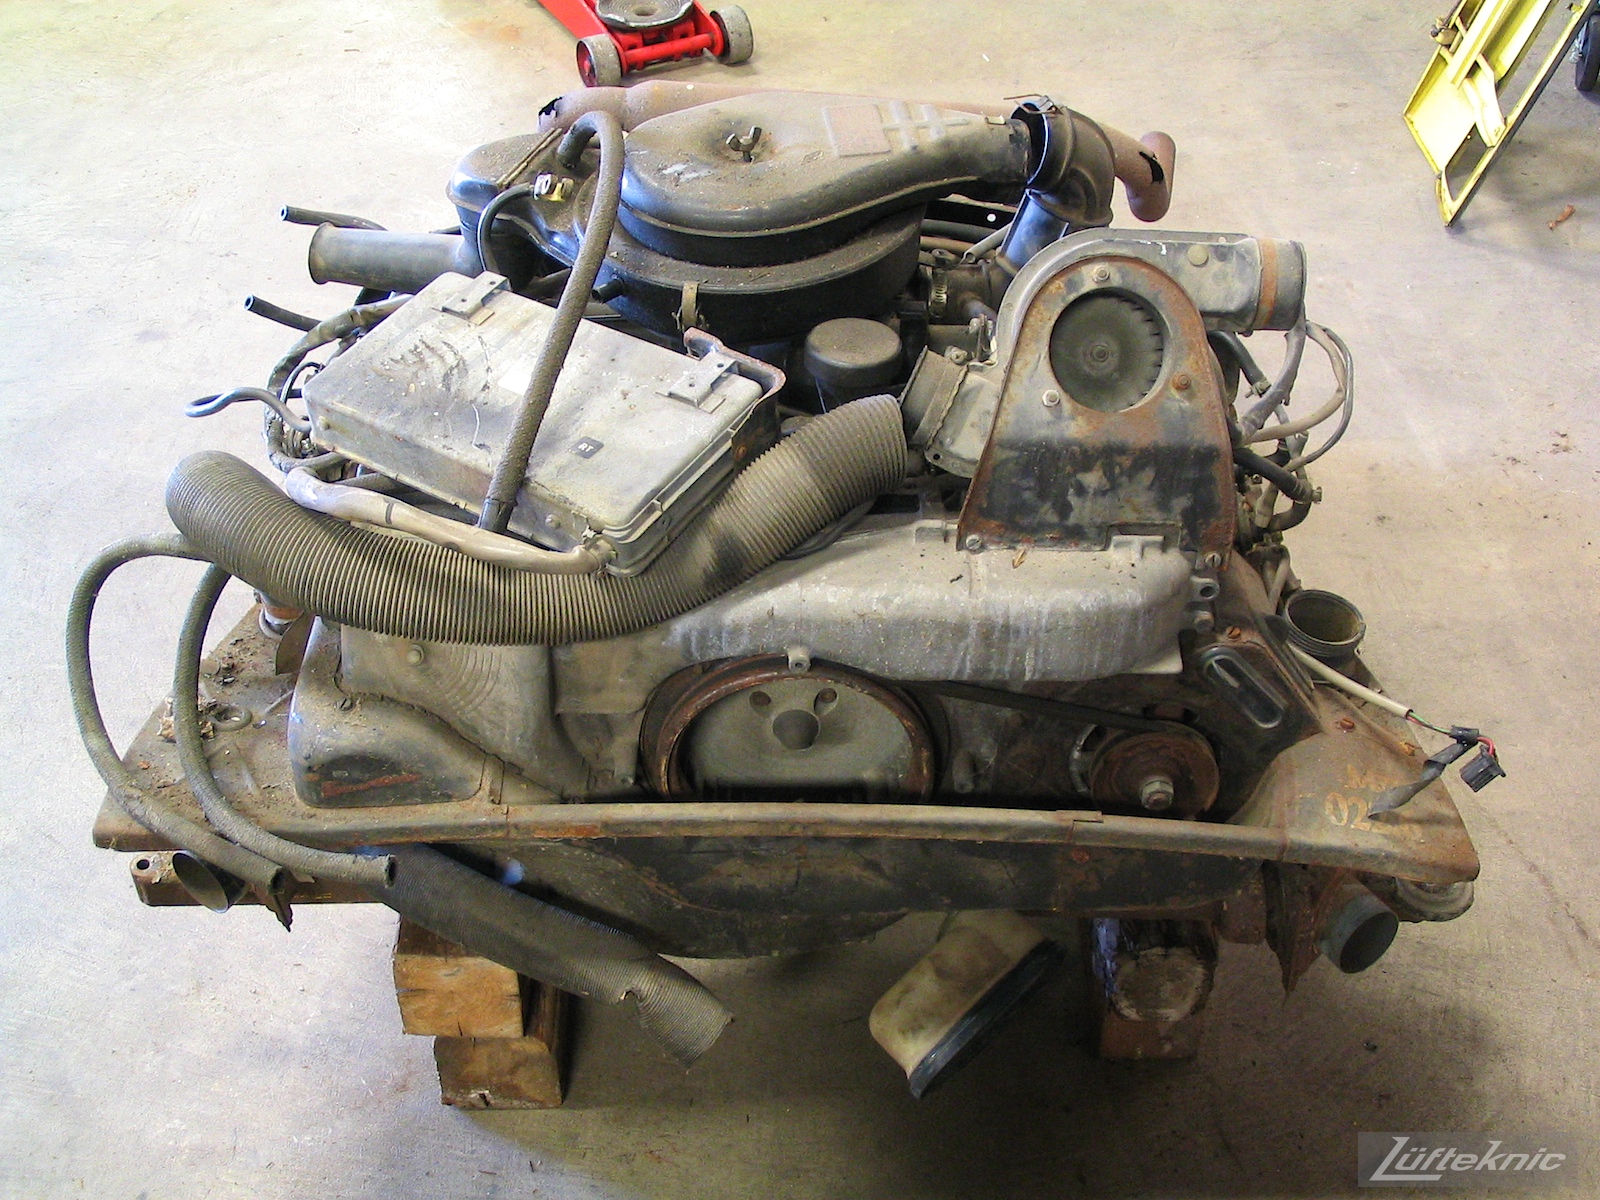 A neglected 914 engine sitting on blocks after removal from a 914 being restored.